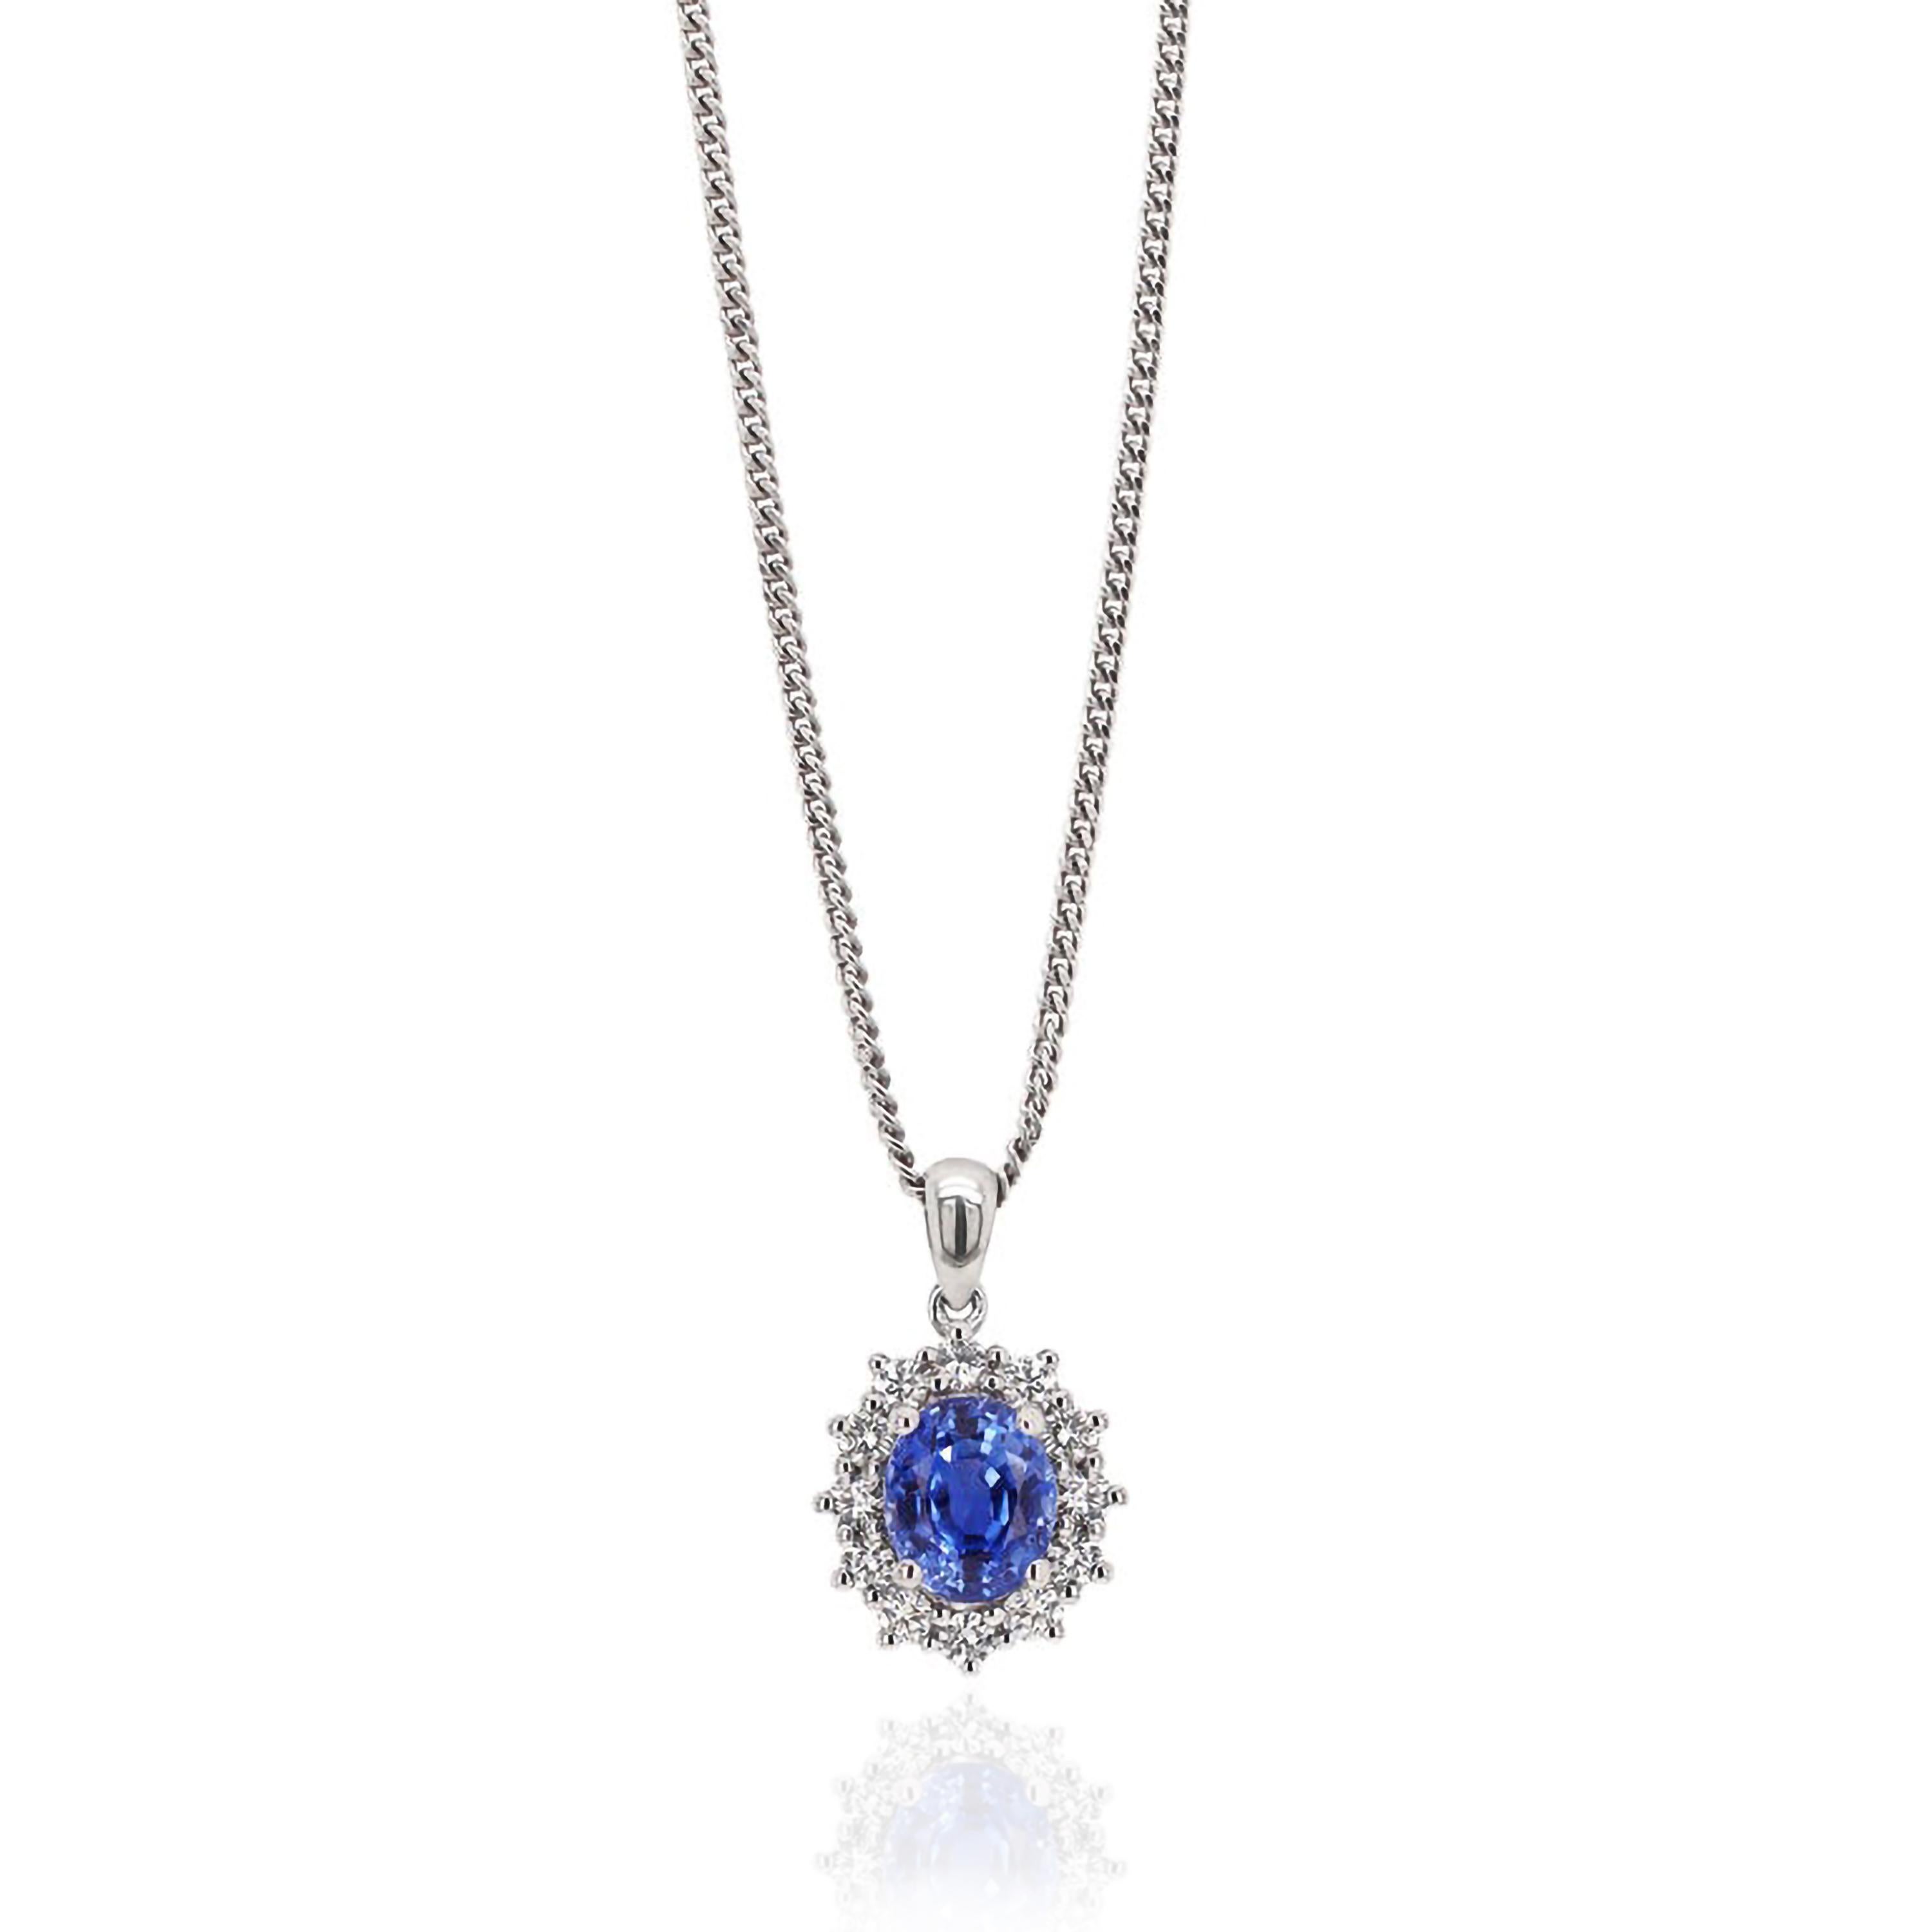 Pendant featuring a 1.88ct vibrant oval blue sapphire set in a four claw open back setting. The beautiful sapphire is surrounded by 12 fine quality round brilliant cut diamonds weighing a total of 0.39ct all claw set in 18ct white gold.